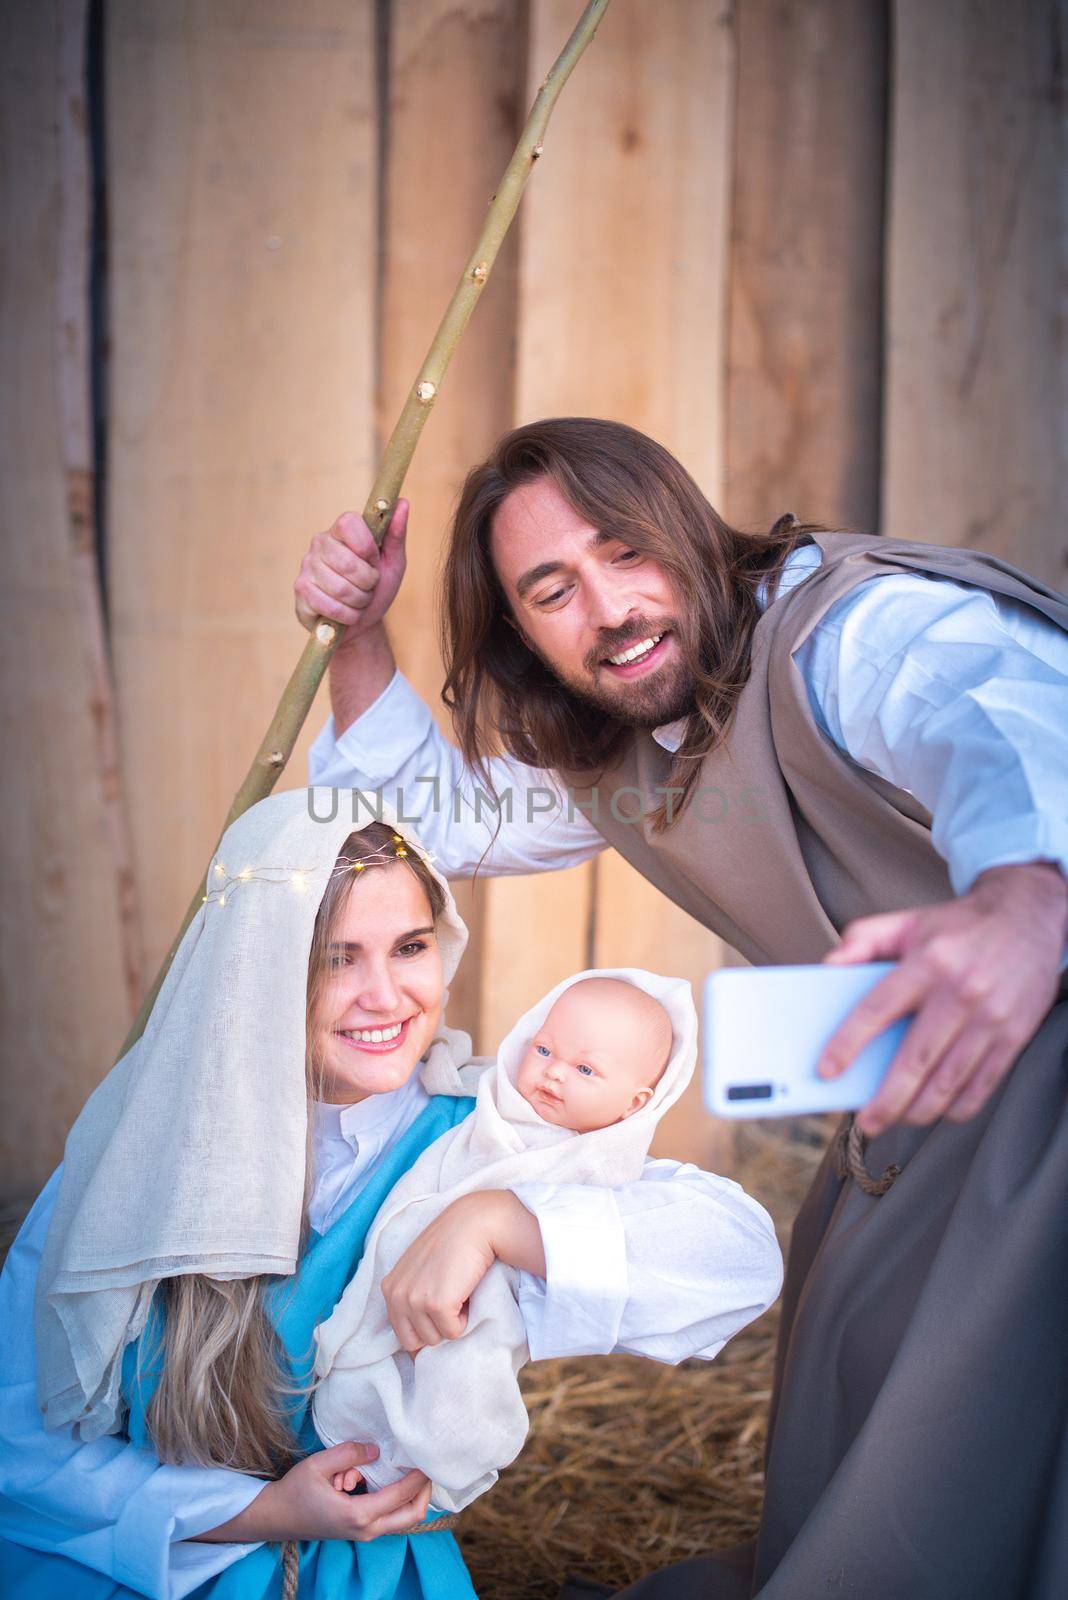 Biblical characters taking selfie while smiling in a nativity scene by ivanmoreno